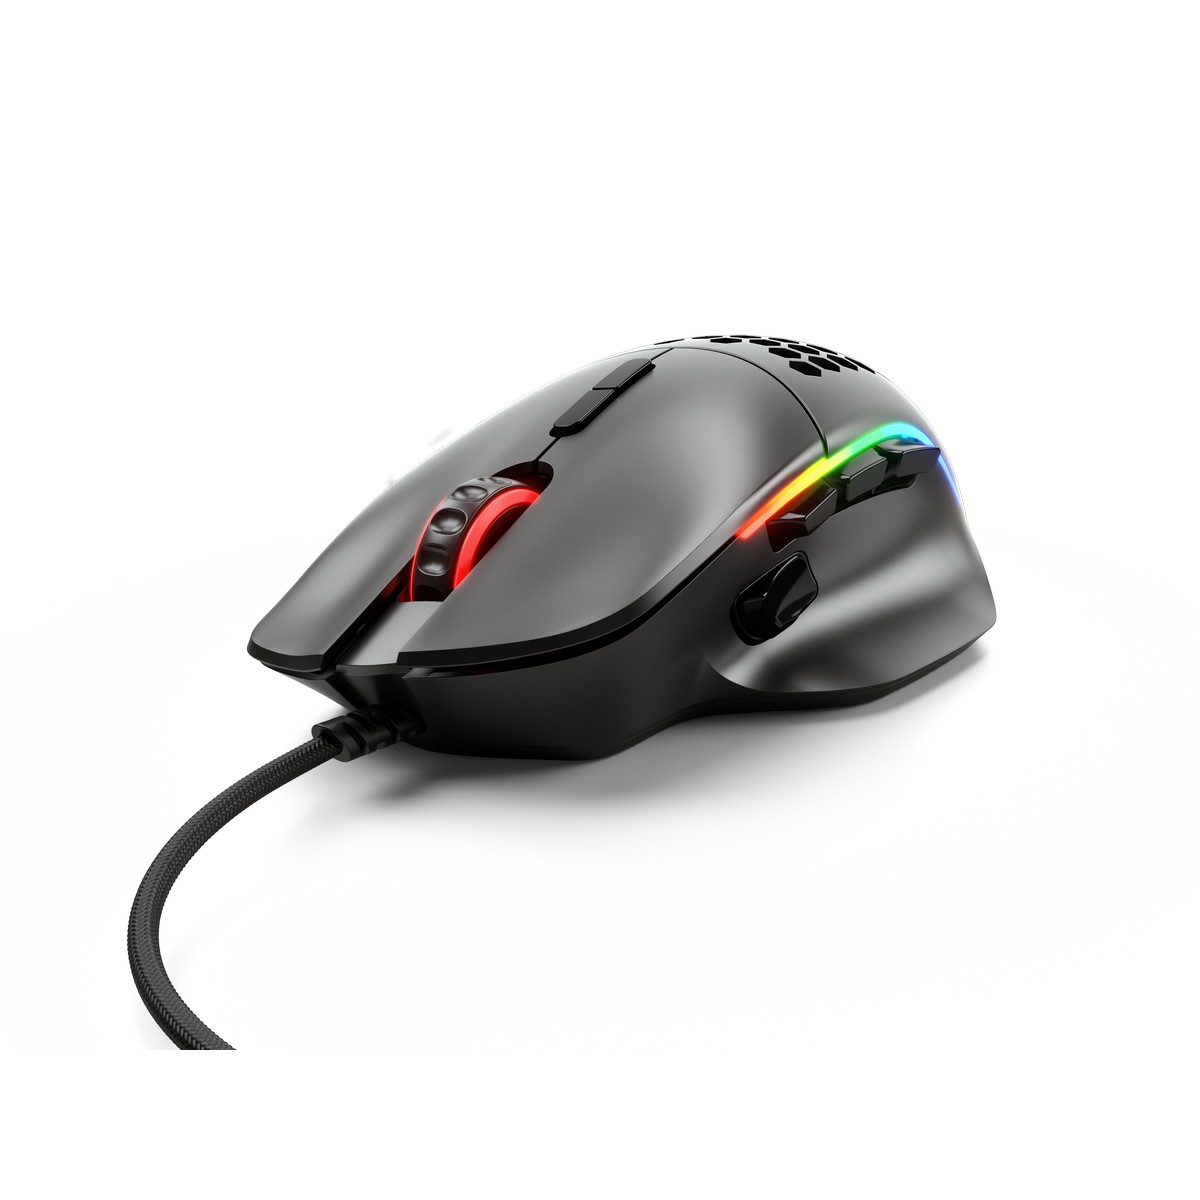 Glorious Model I USB RGB Lightweight Gaming Mouse - Matte Black (GLO-MS-I-MB)